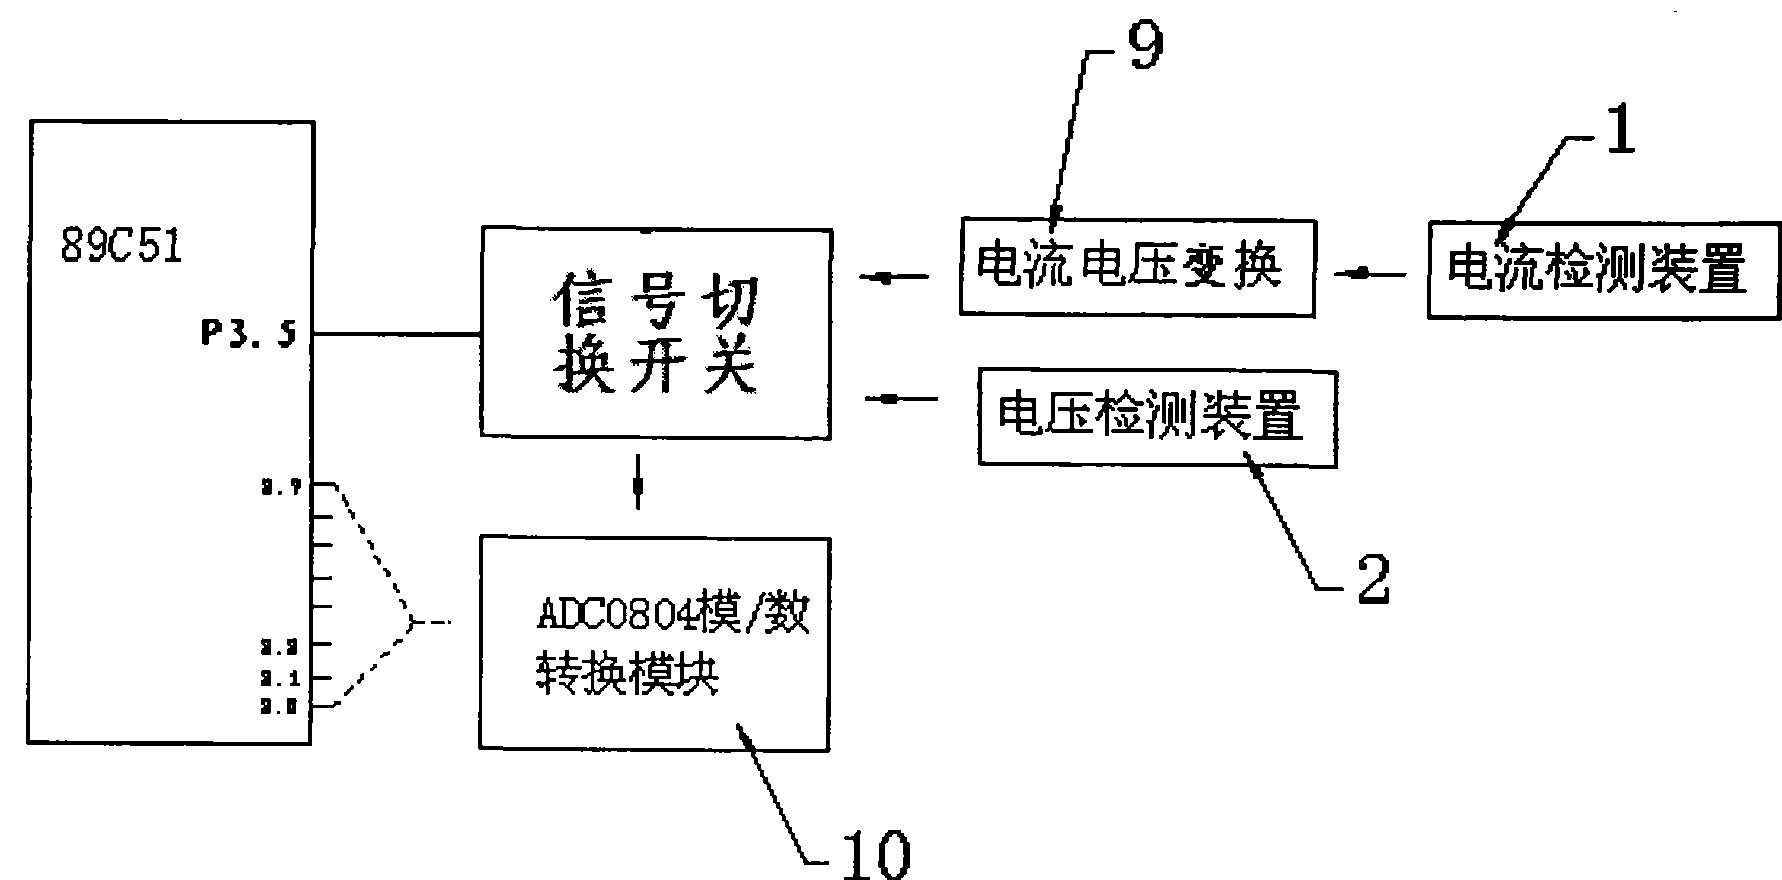 Automatic charging discharging controller for accumulator